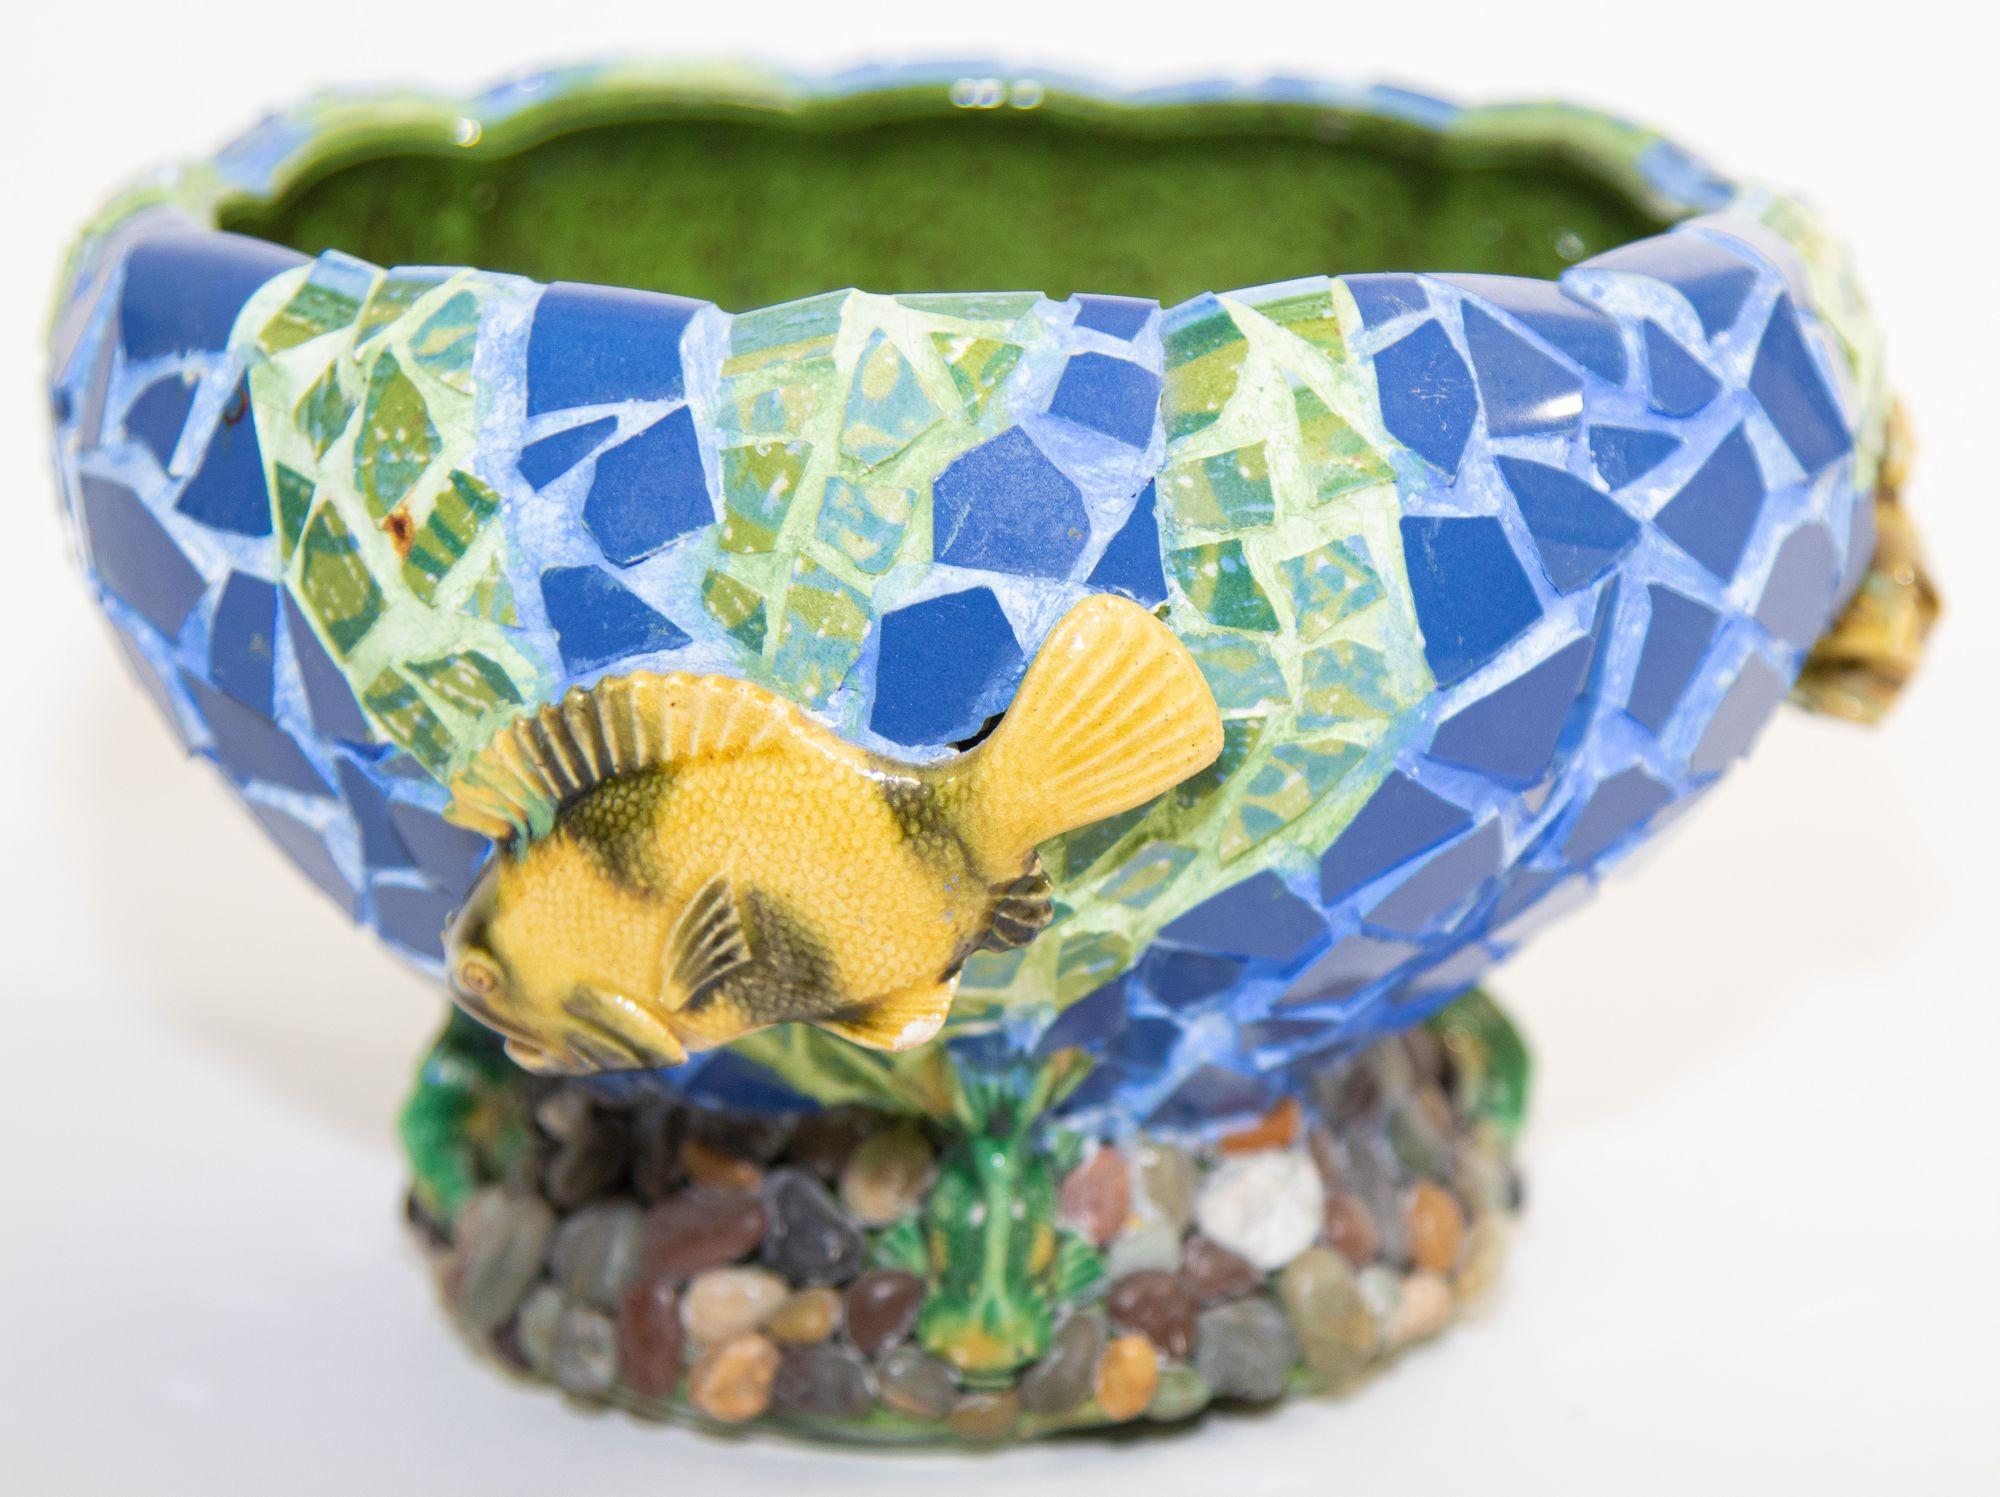 Hand-Crafted Jeannie Houston Antes Mosaic Mix Media Aquarius Planter For Sale